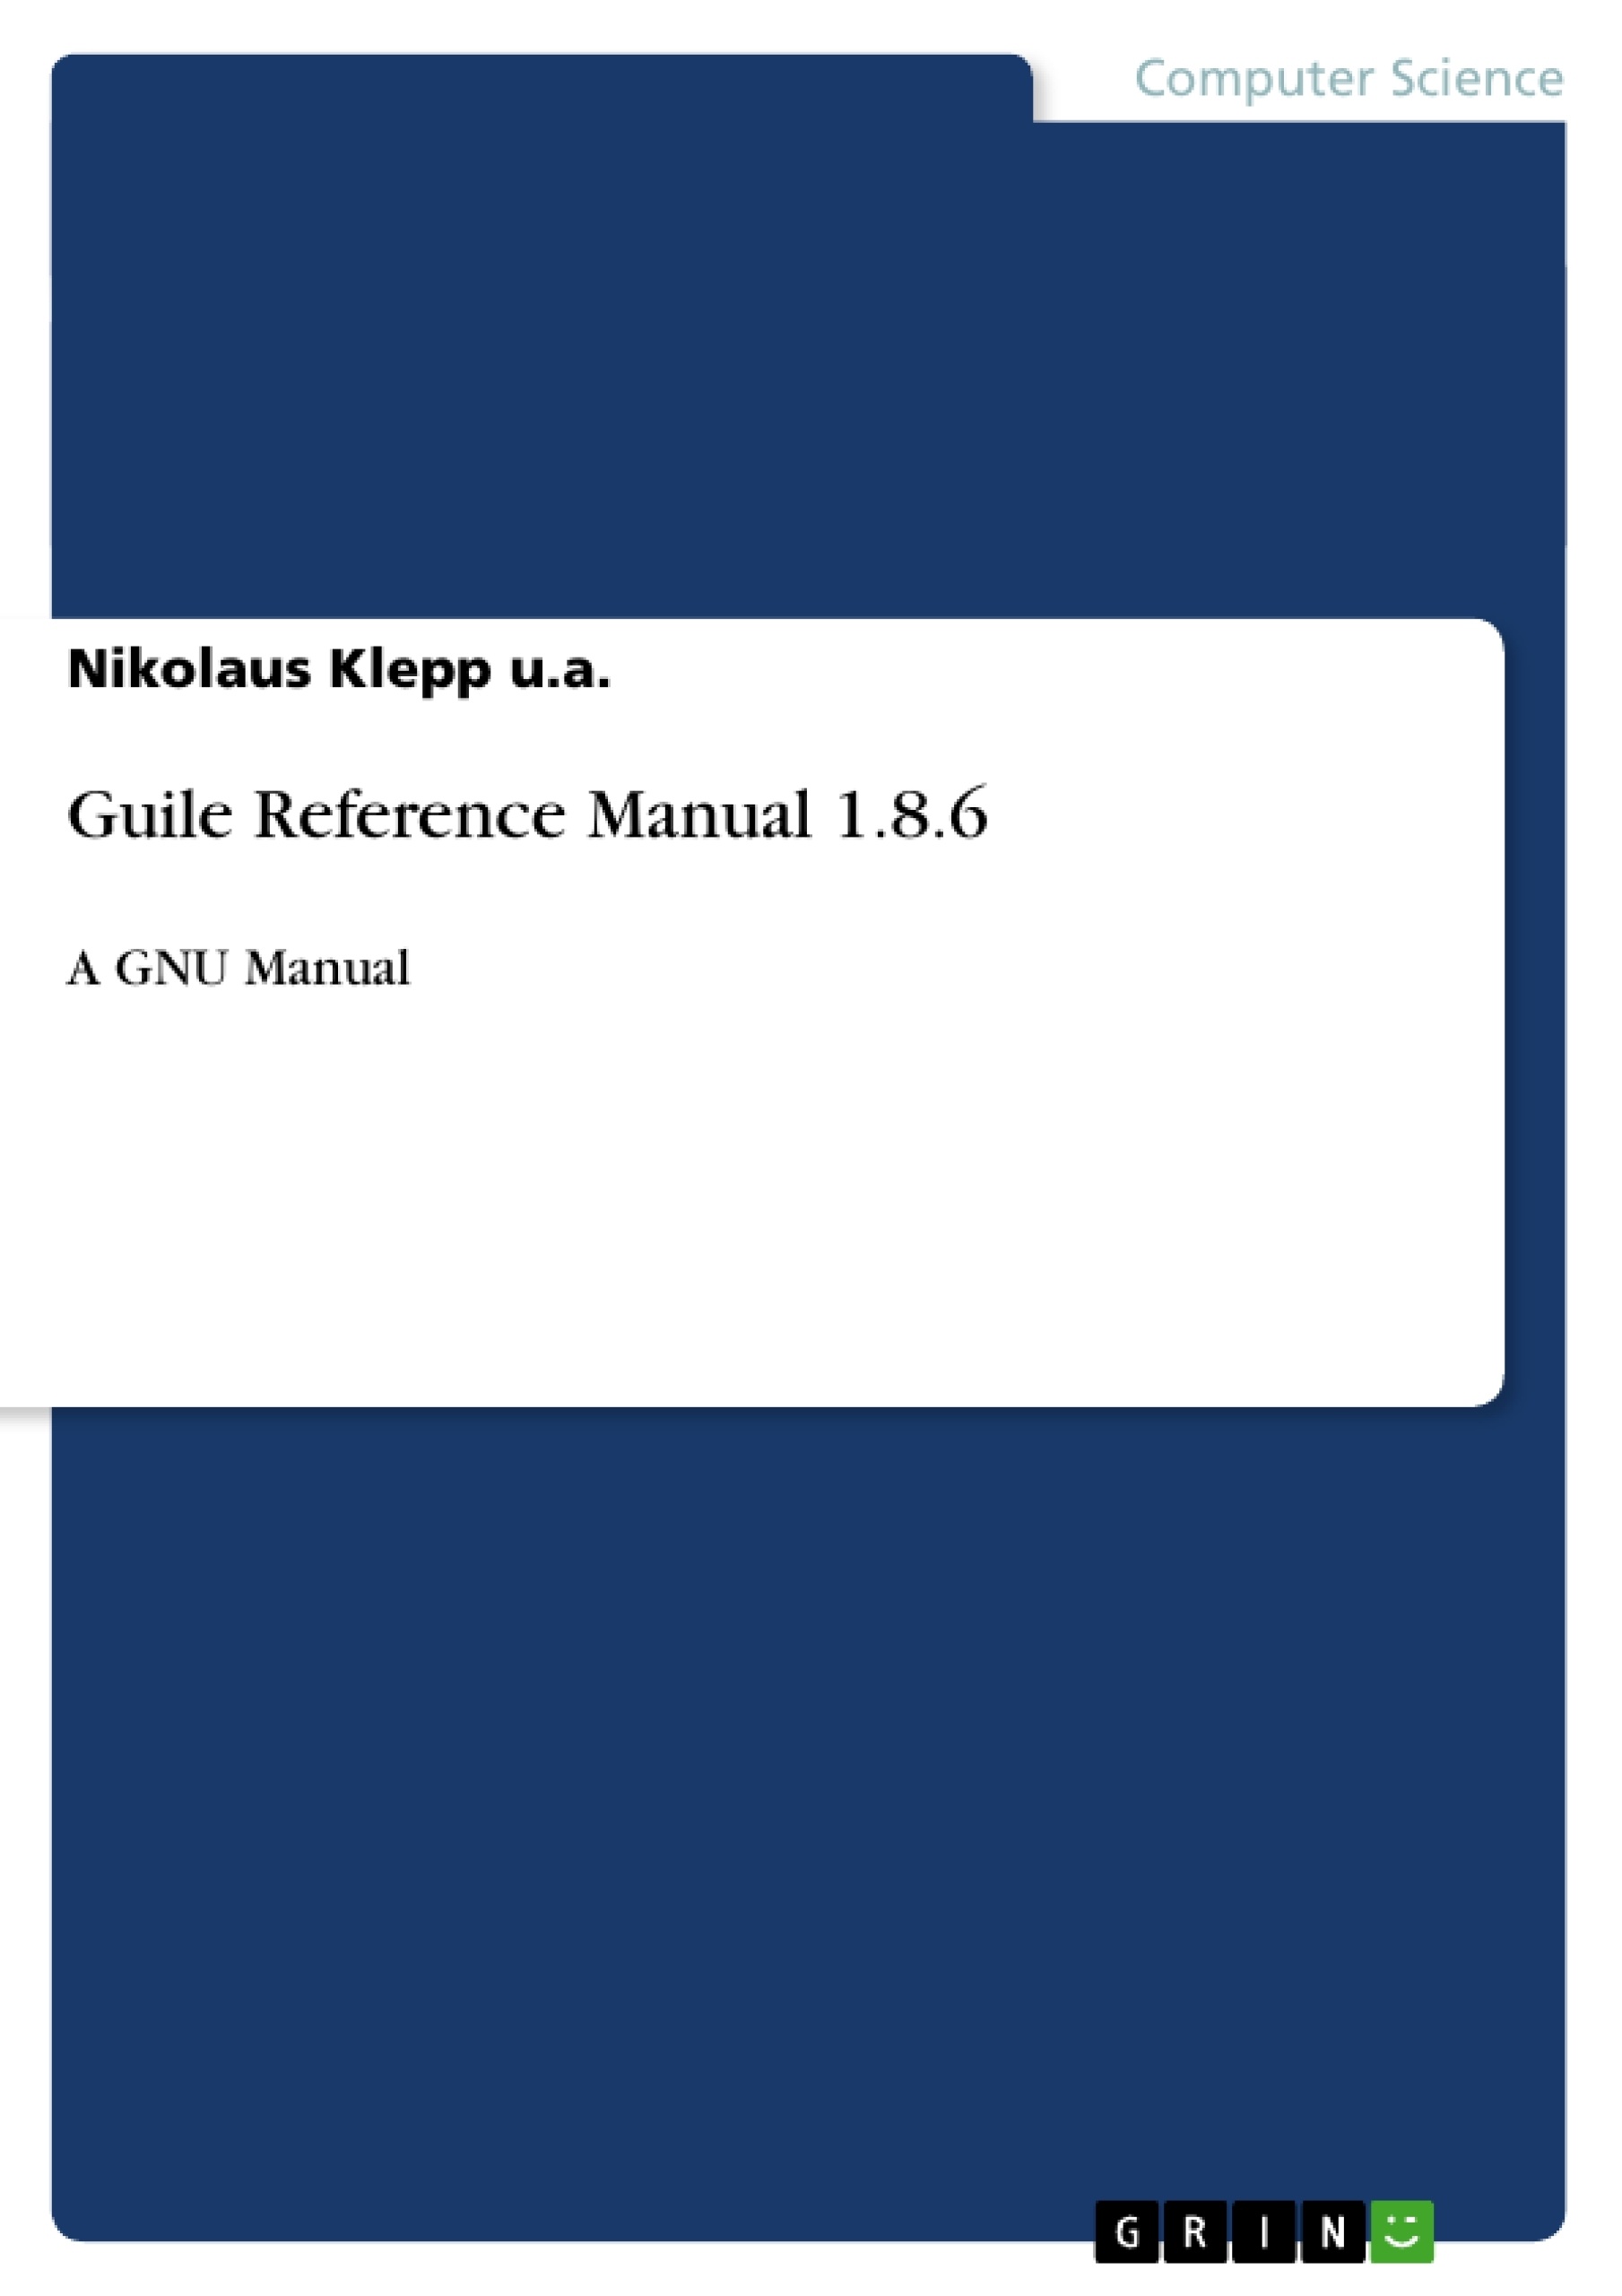 Titre: Guile Reference Manual 1.8.6